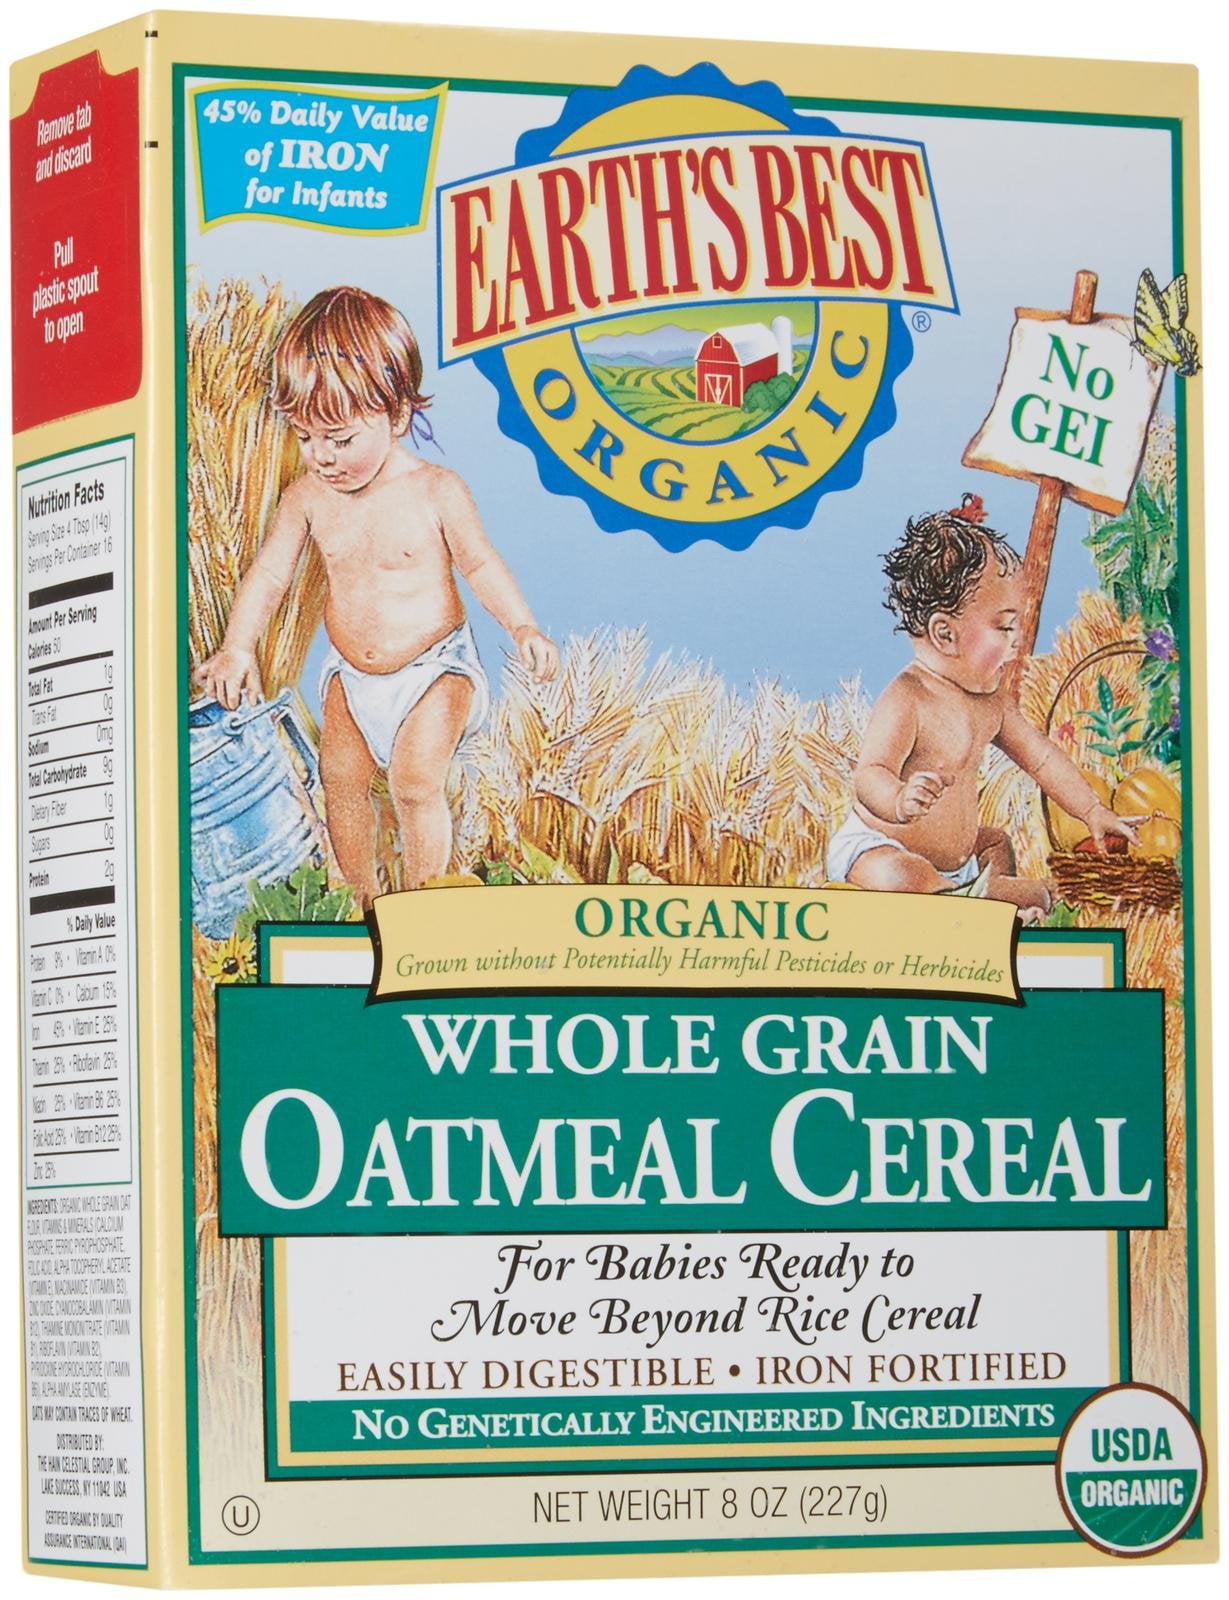 best baby cereal canada